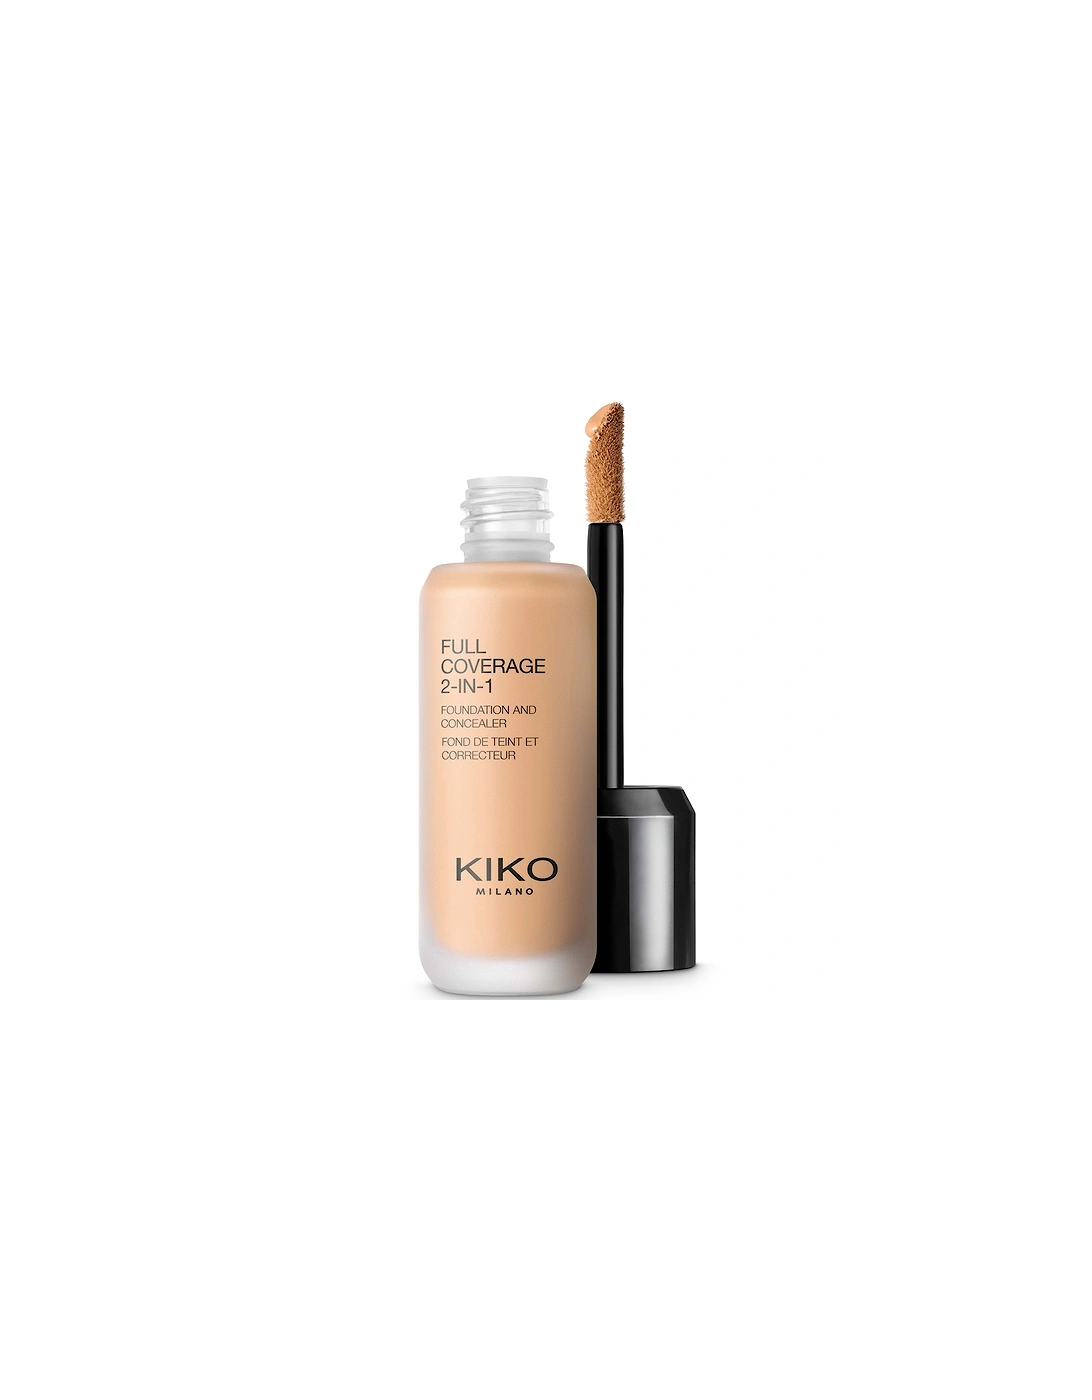 Full Coverage 2-in-1 Foundation and Concealer 25ml - 40 Warm Beige, 2 of 1